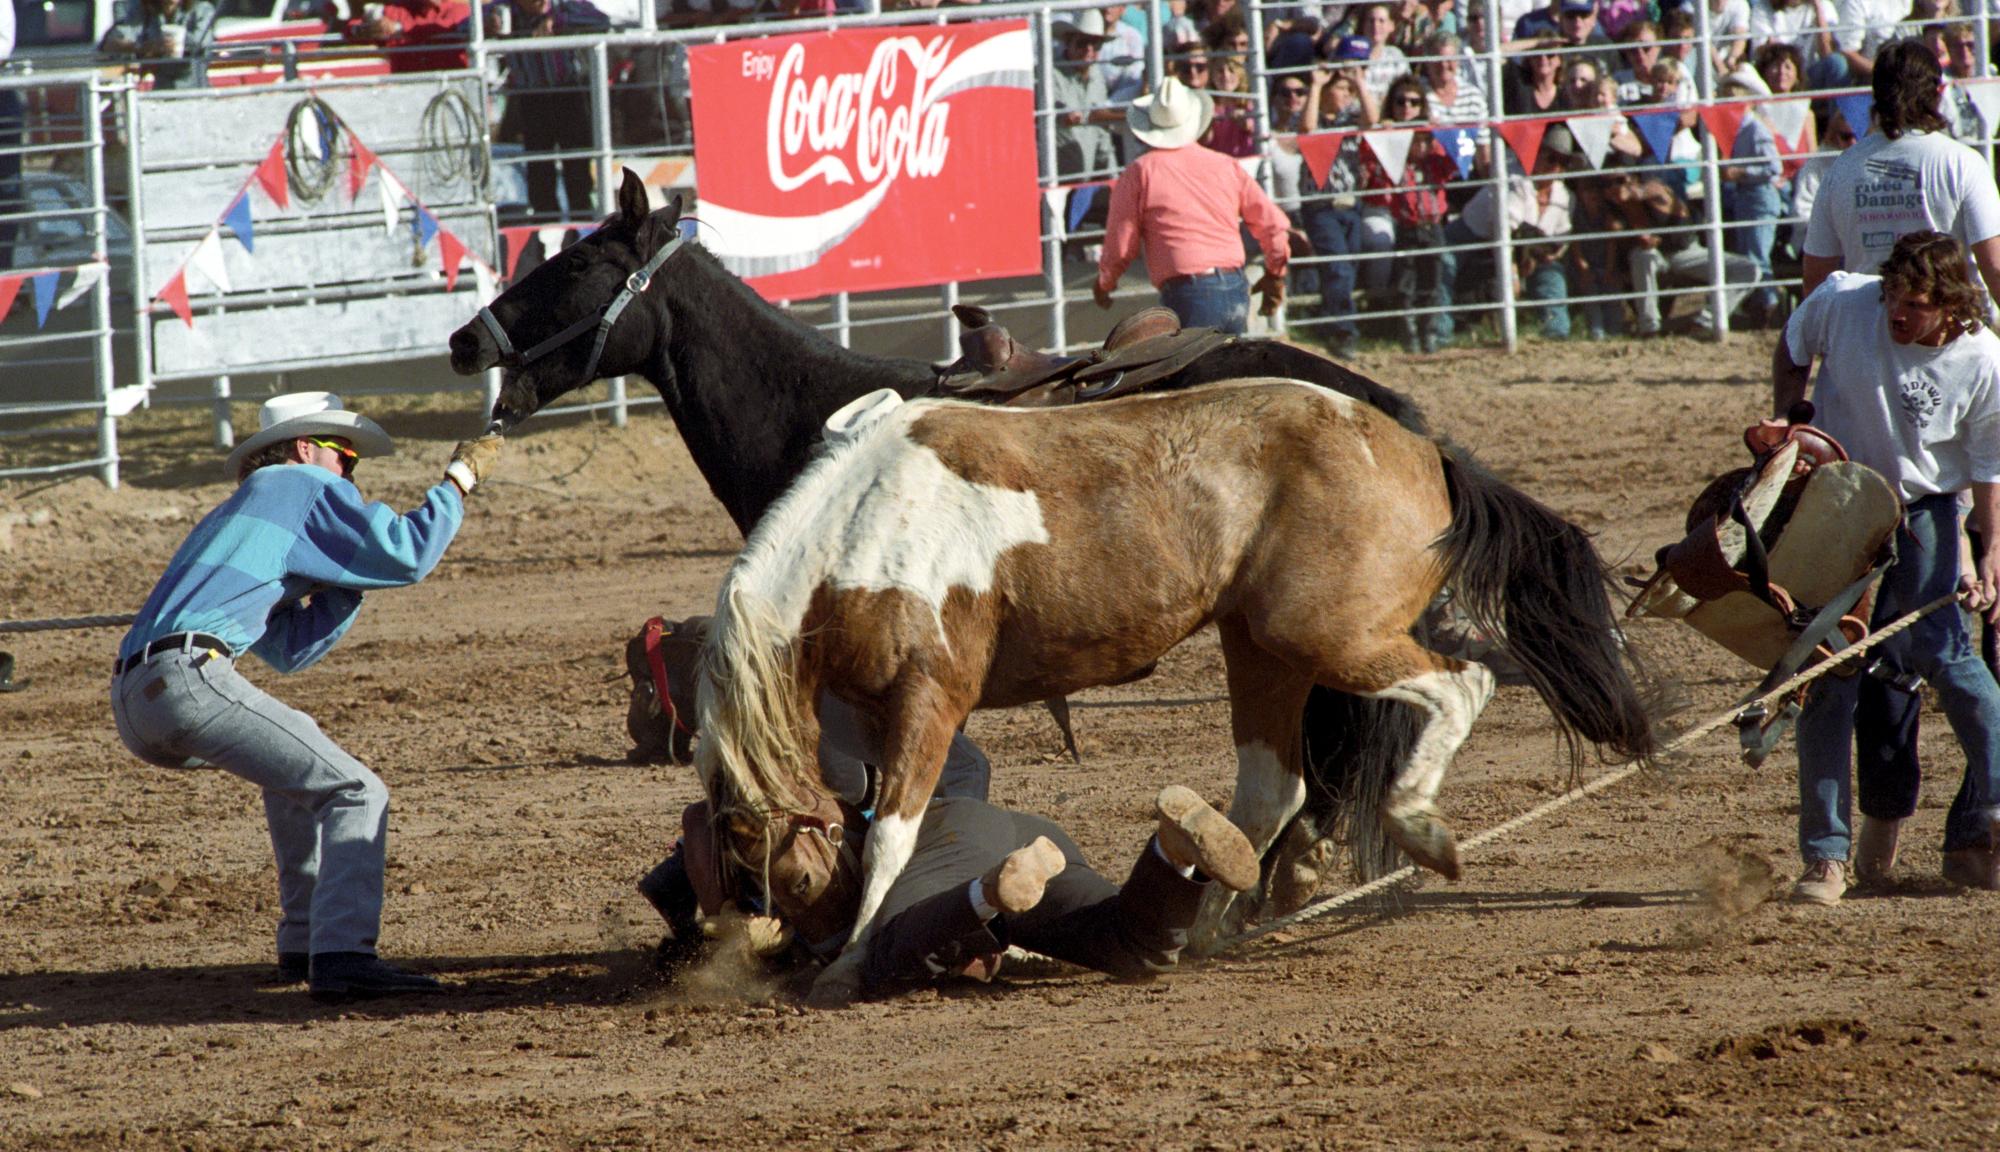 Imperial Valley Rodeo (1992) - Wild Horses #3